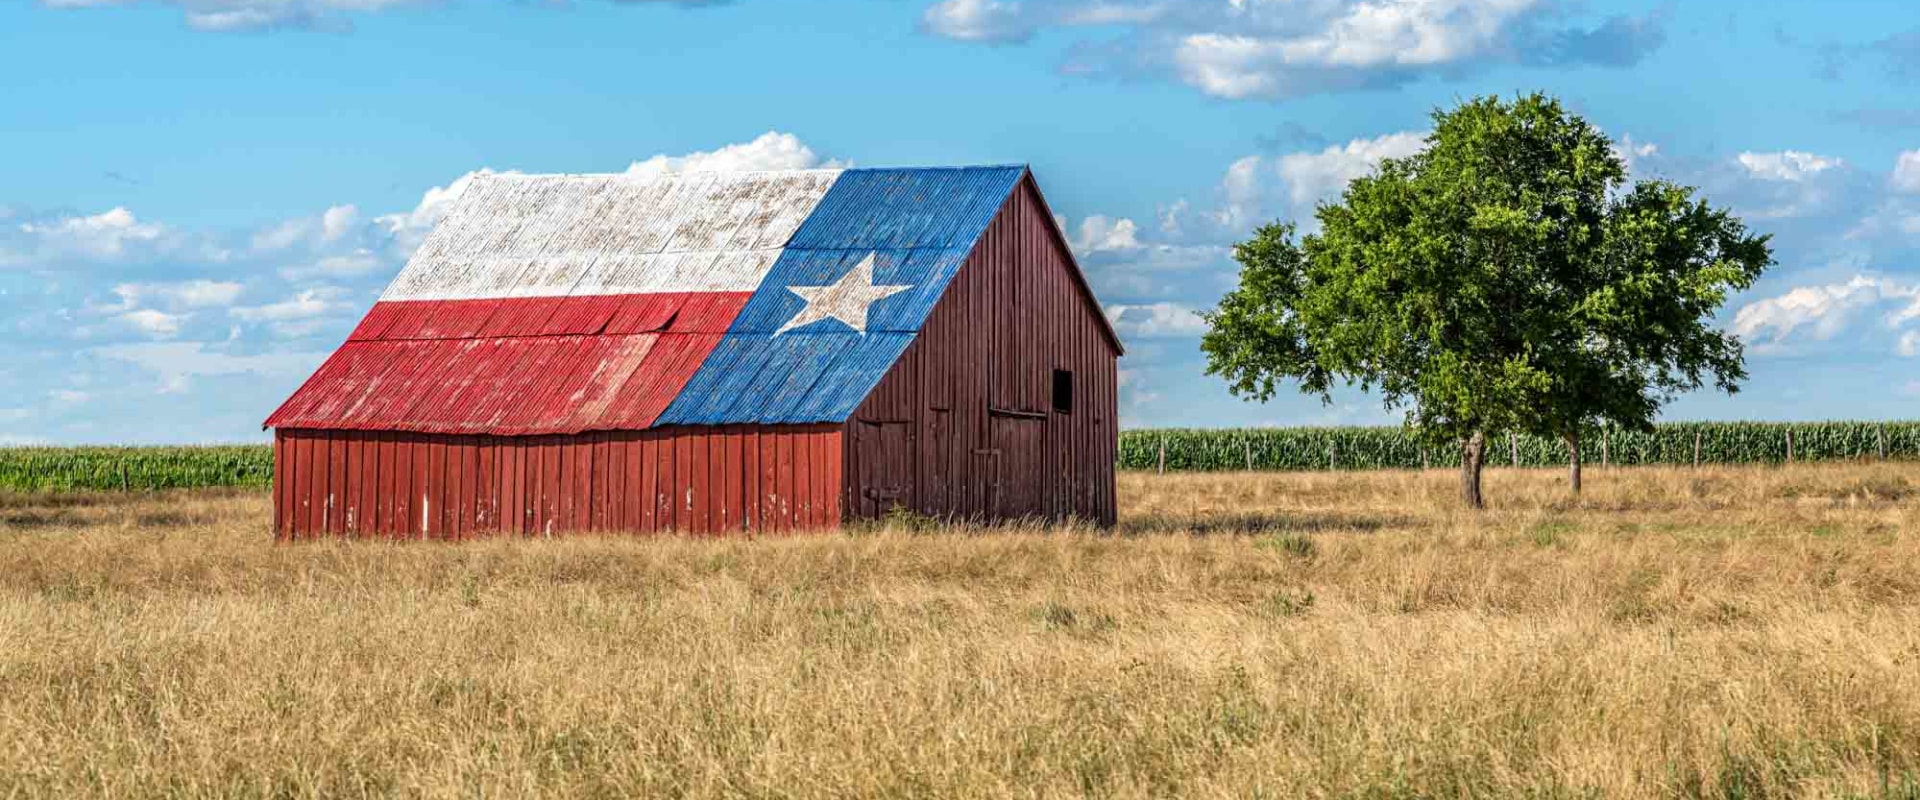 What are 5 weird texas facts?